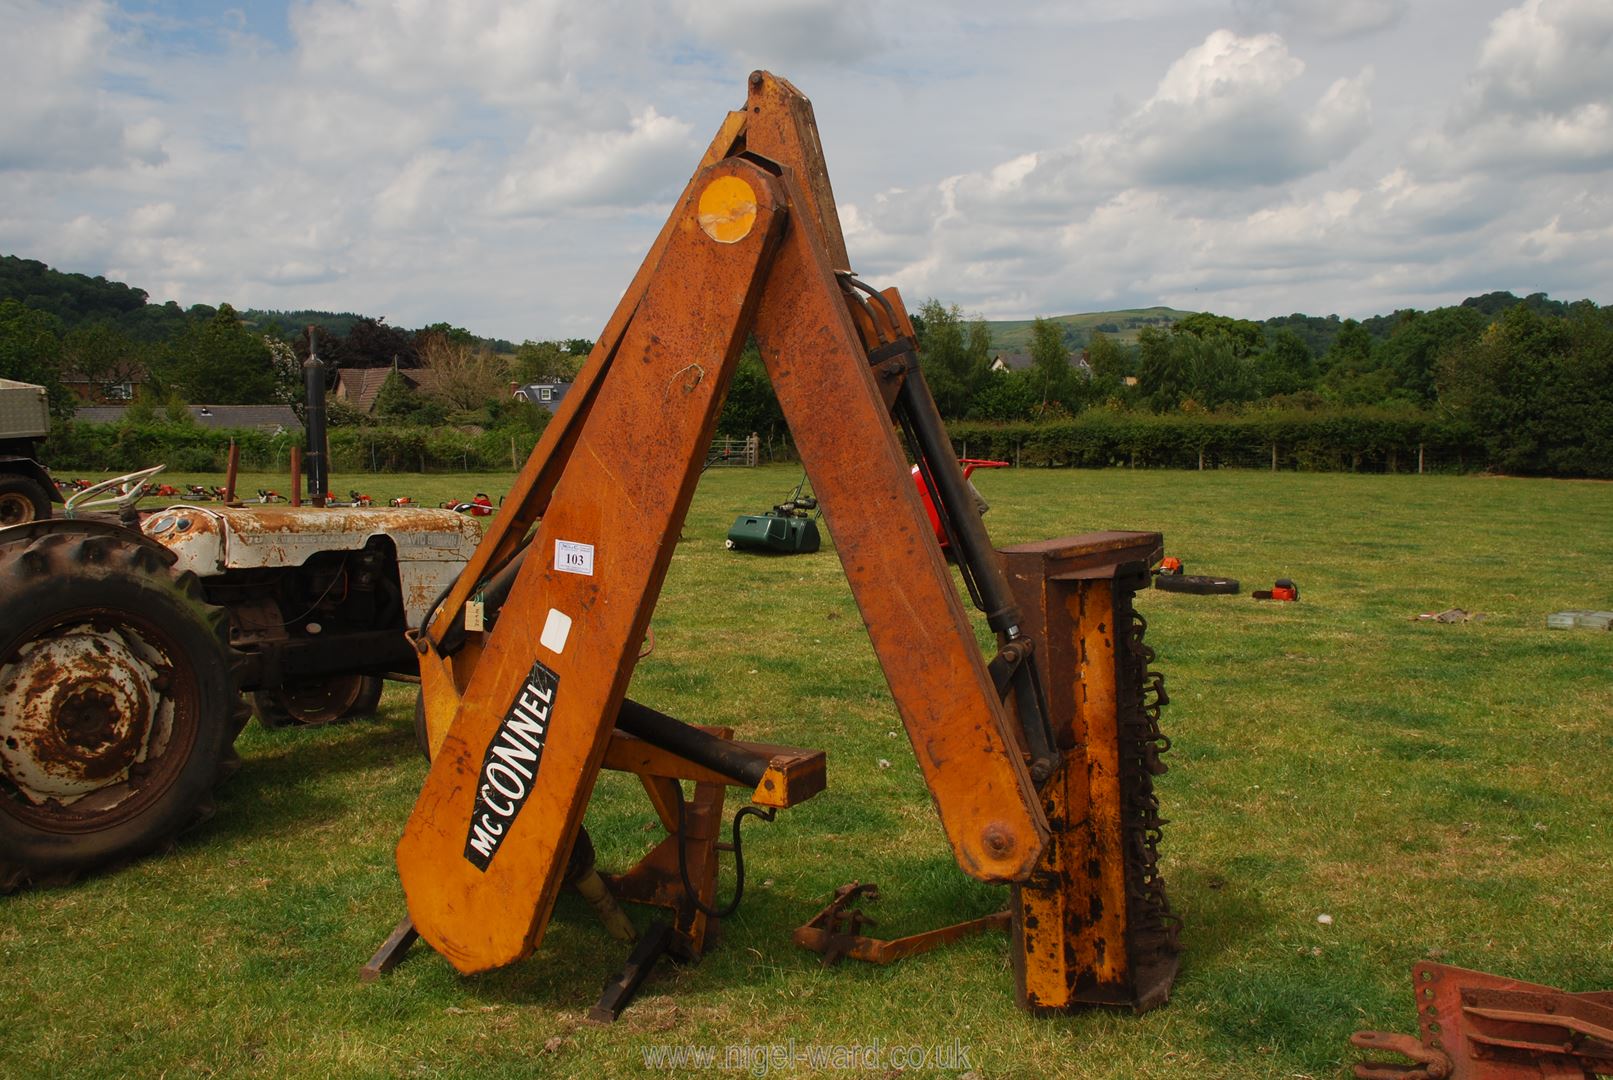 A McConnell hedge trimmer with 3ft head.